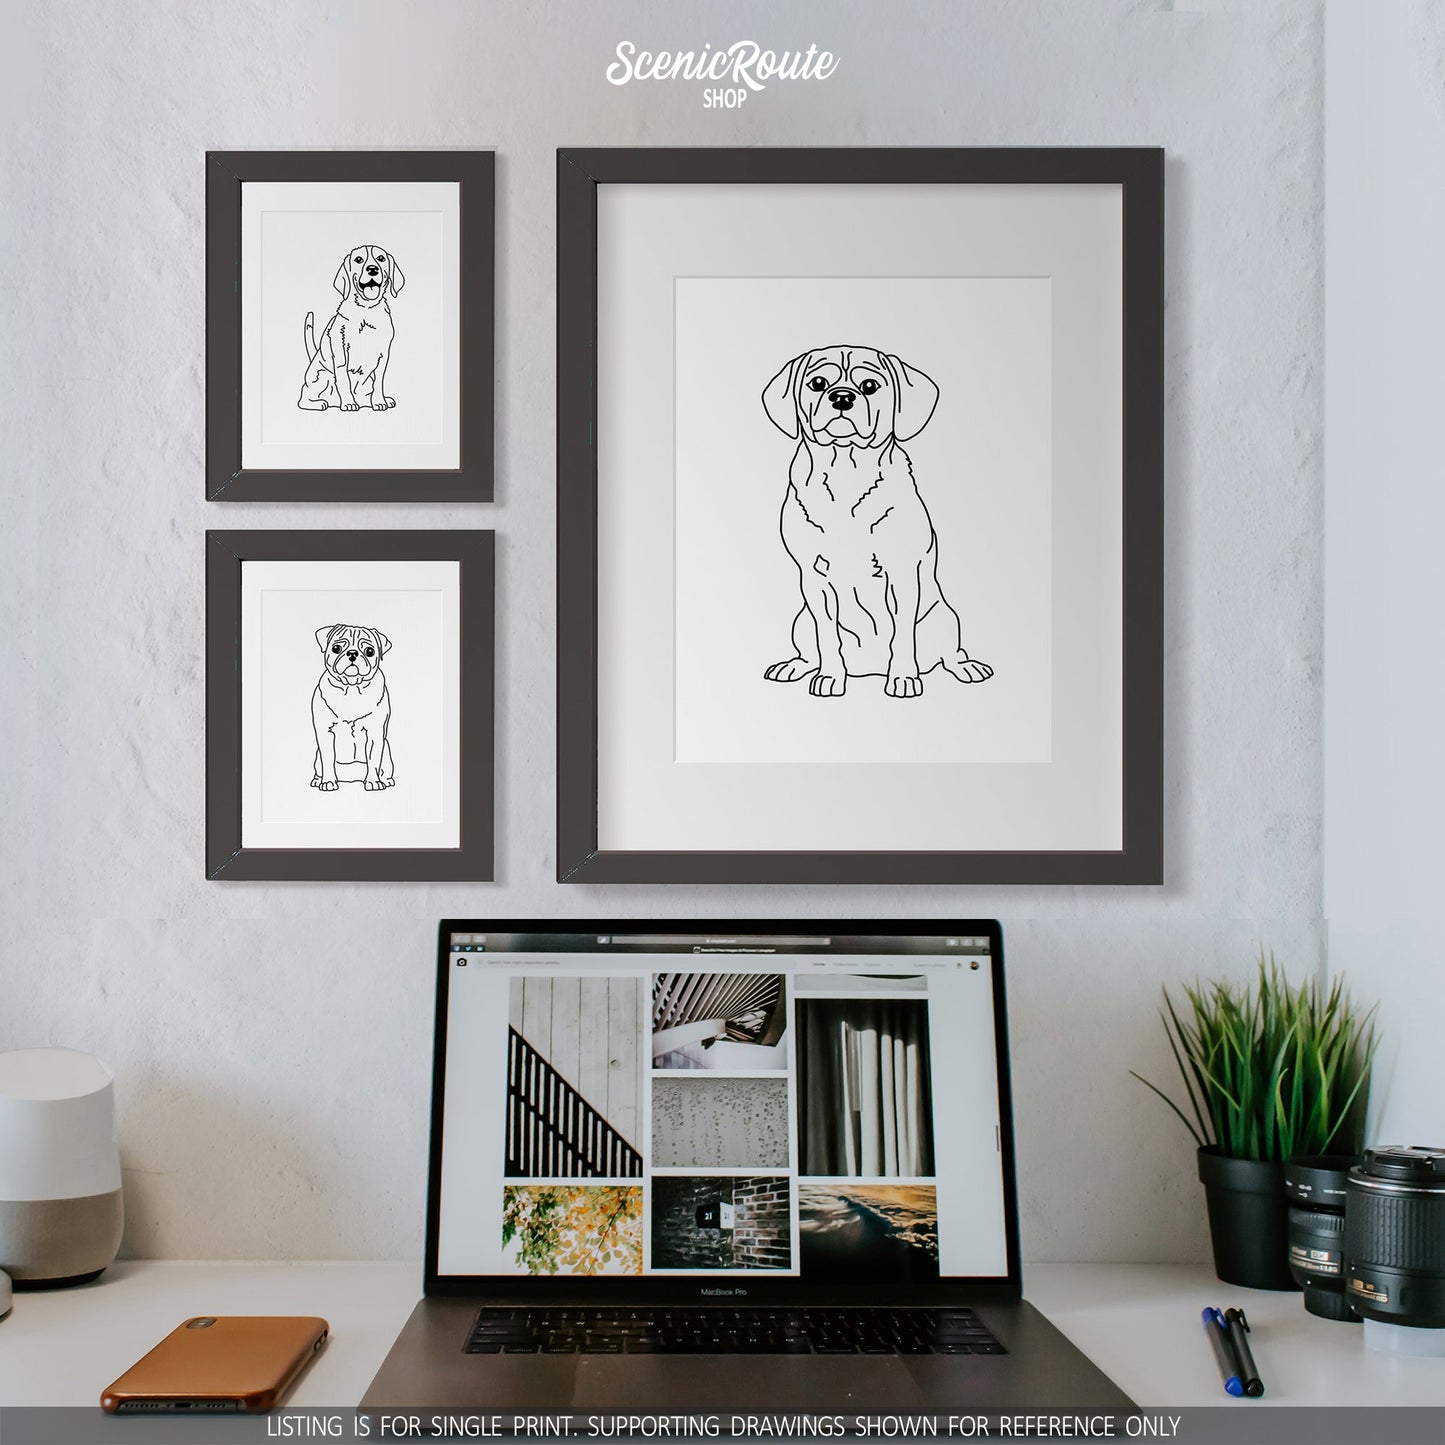 A group of three framed drawings on a white wall above a desk with a laptop. The line art drawings include a Beagle dog, a Pug dog, and a Puggle dog